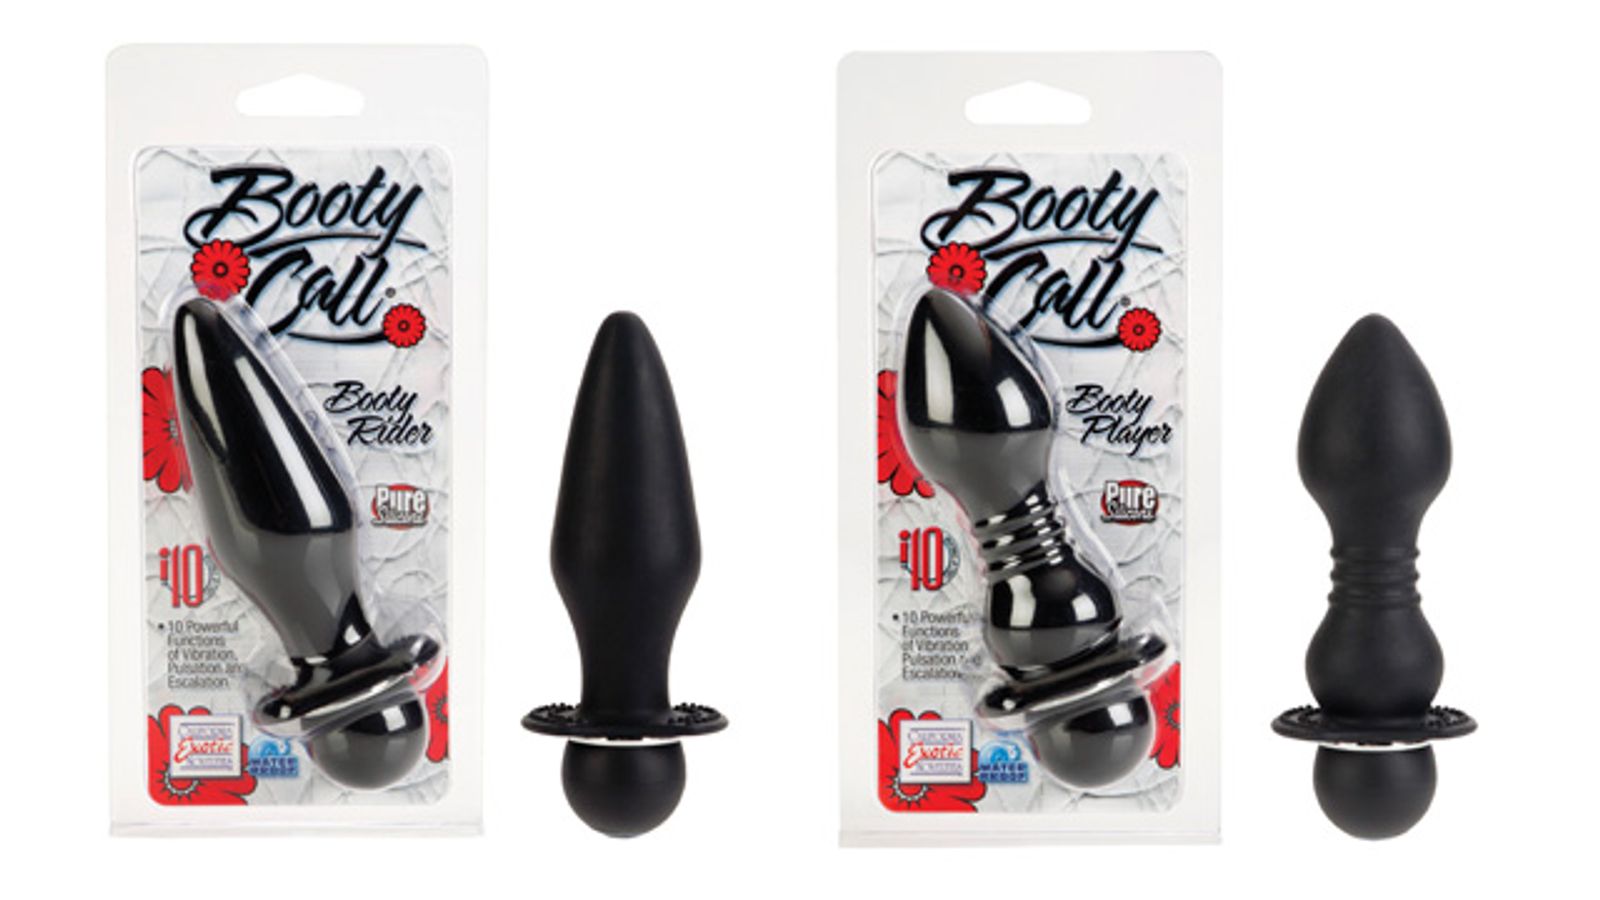 California Exotic Novelties Releases New Booty Call Items